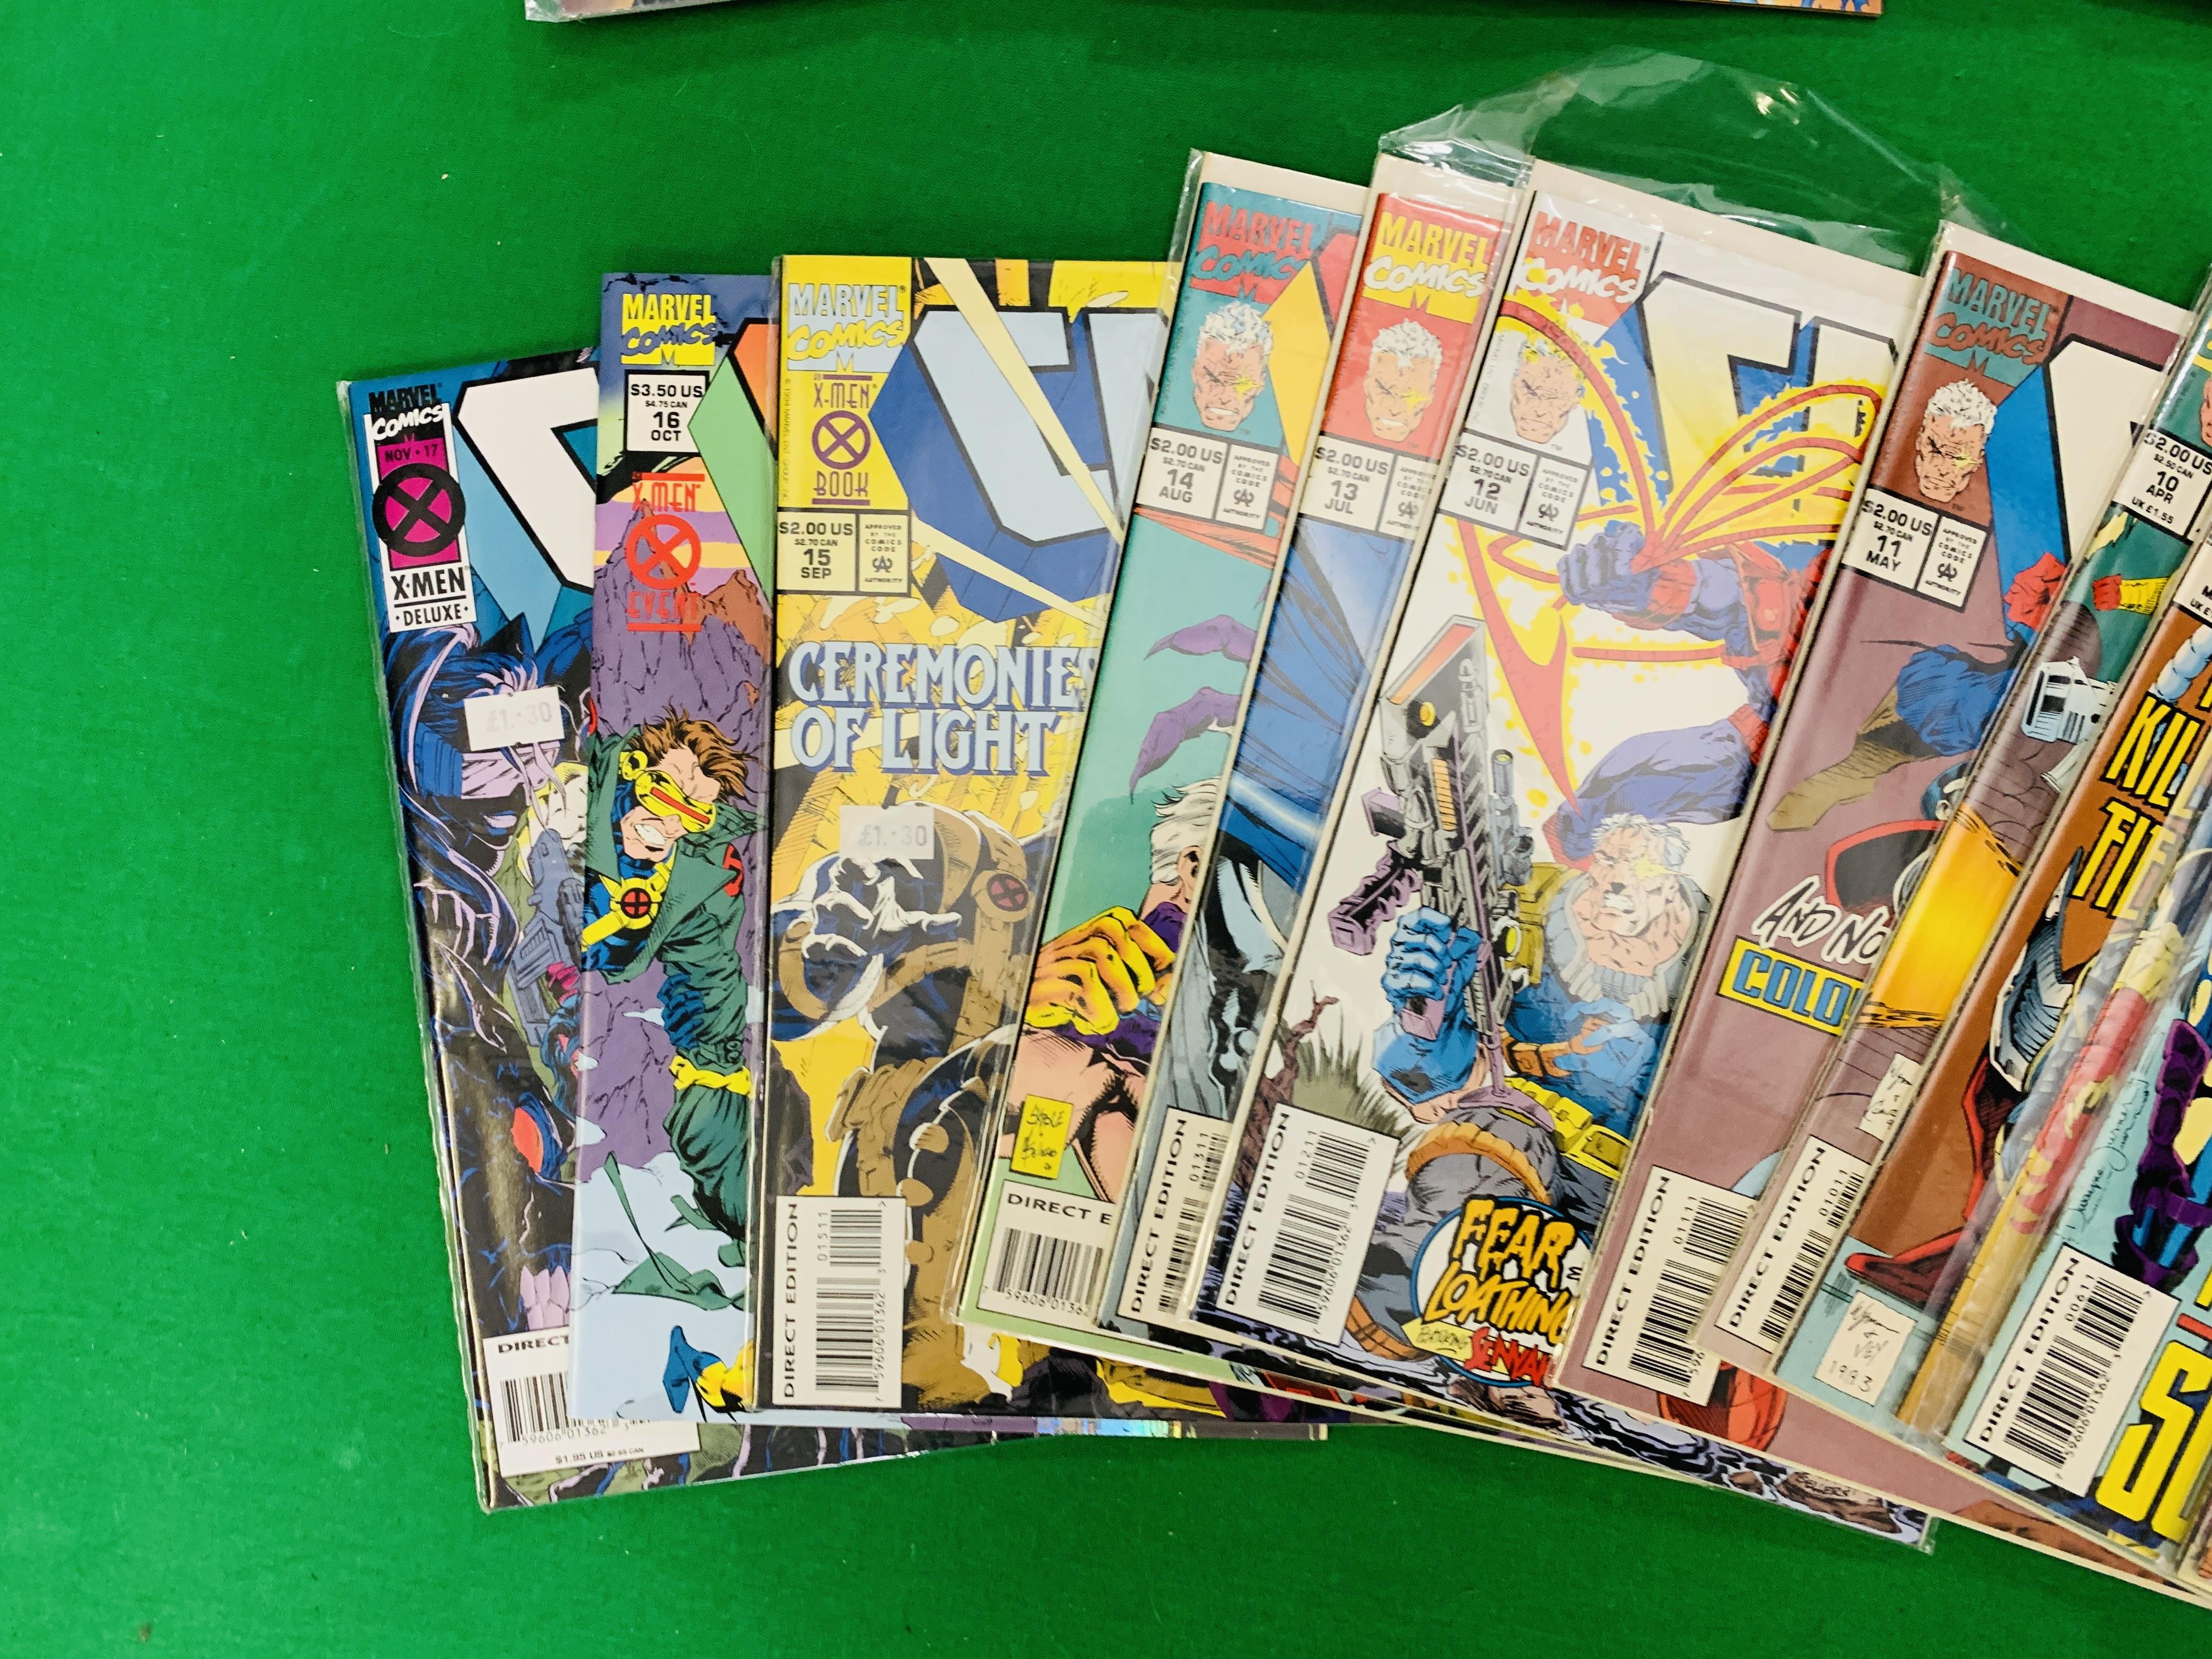 MARVEL COMICS CABLE NO. 1 - 40 FROM 1993. MISSING NO. 25. LIMITED RUN PLUS FLASHBACK. NO. - Image 2 of 7